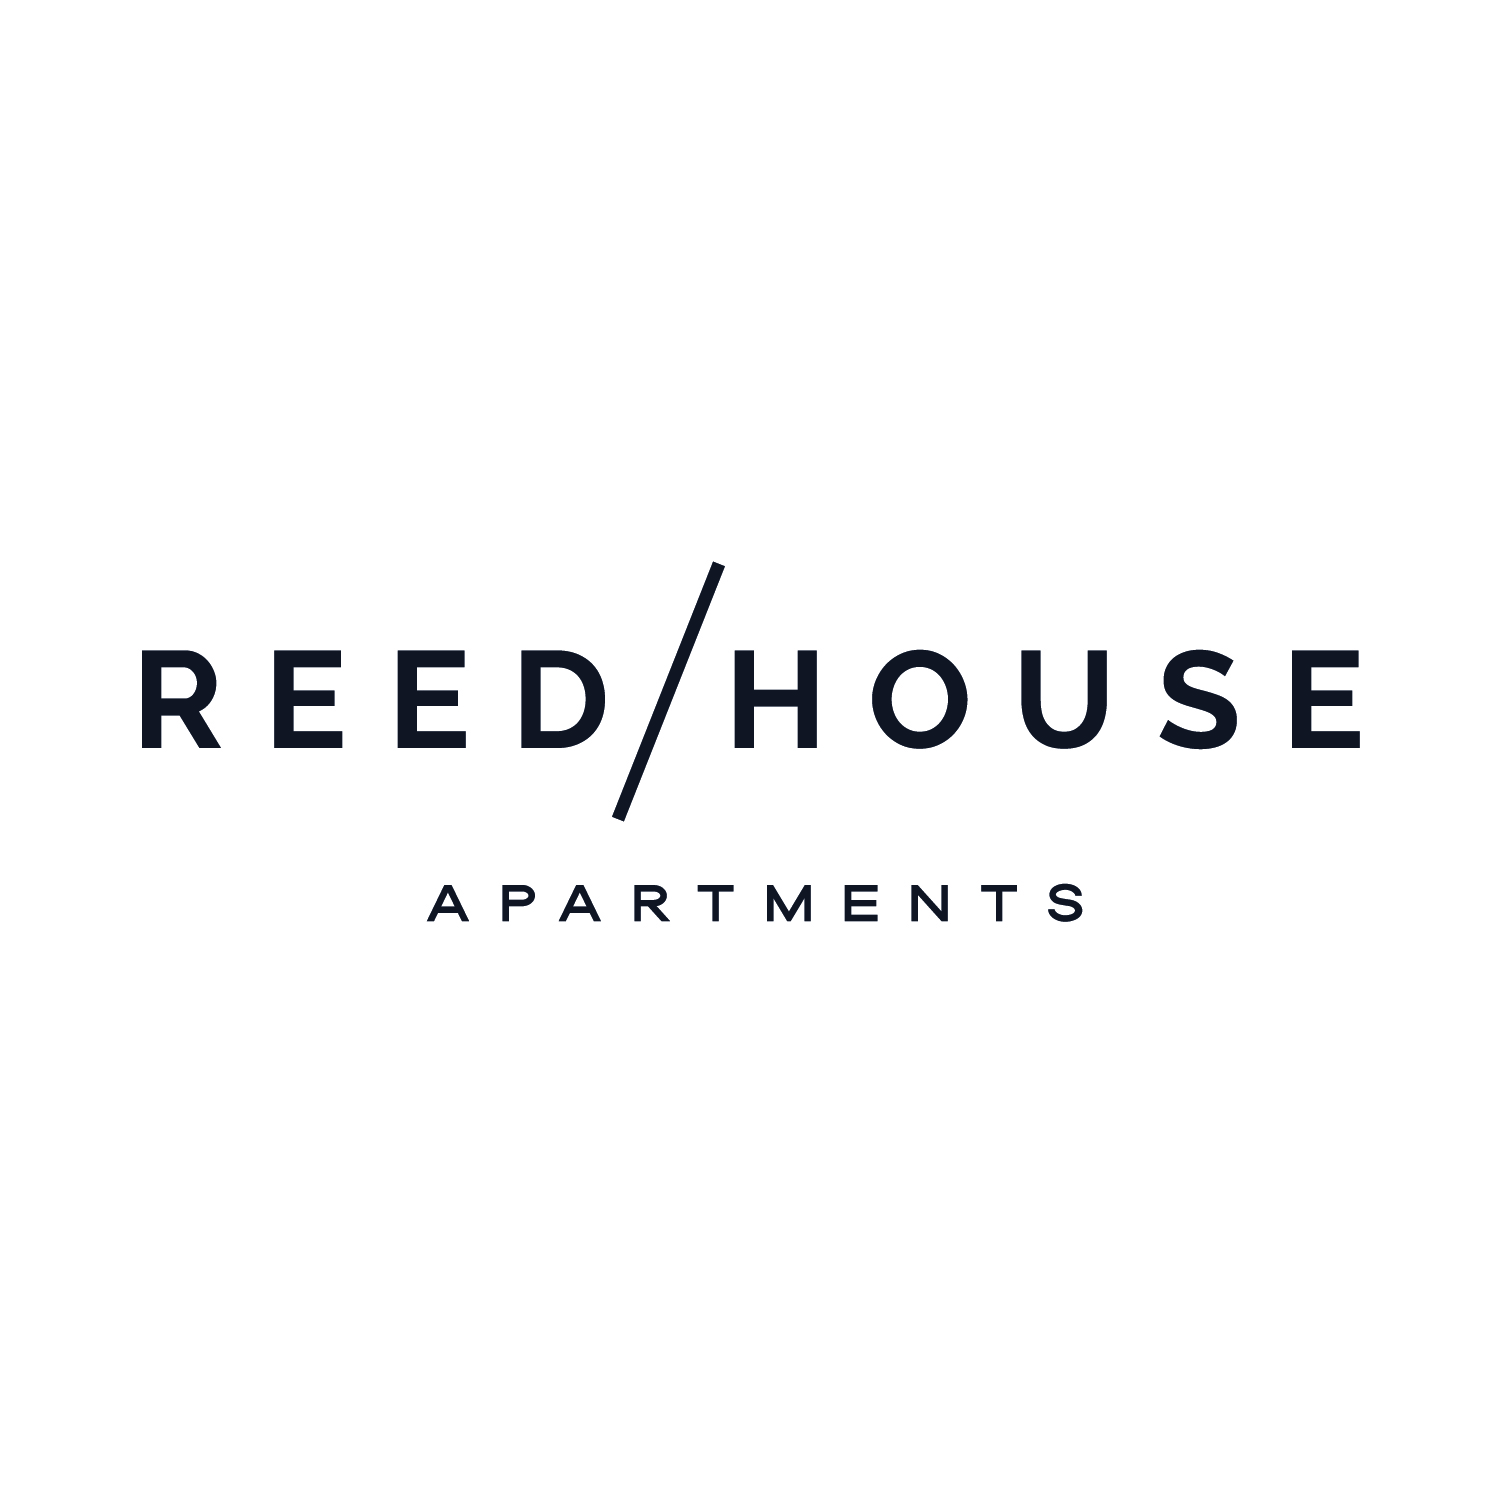 The Reed House Apartments